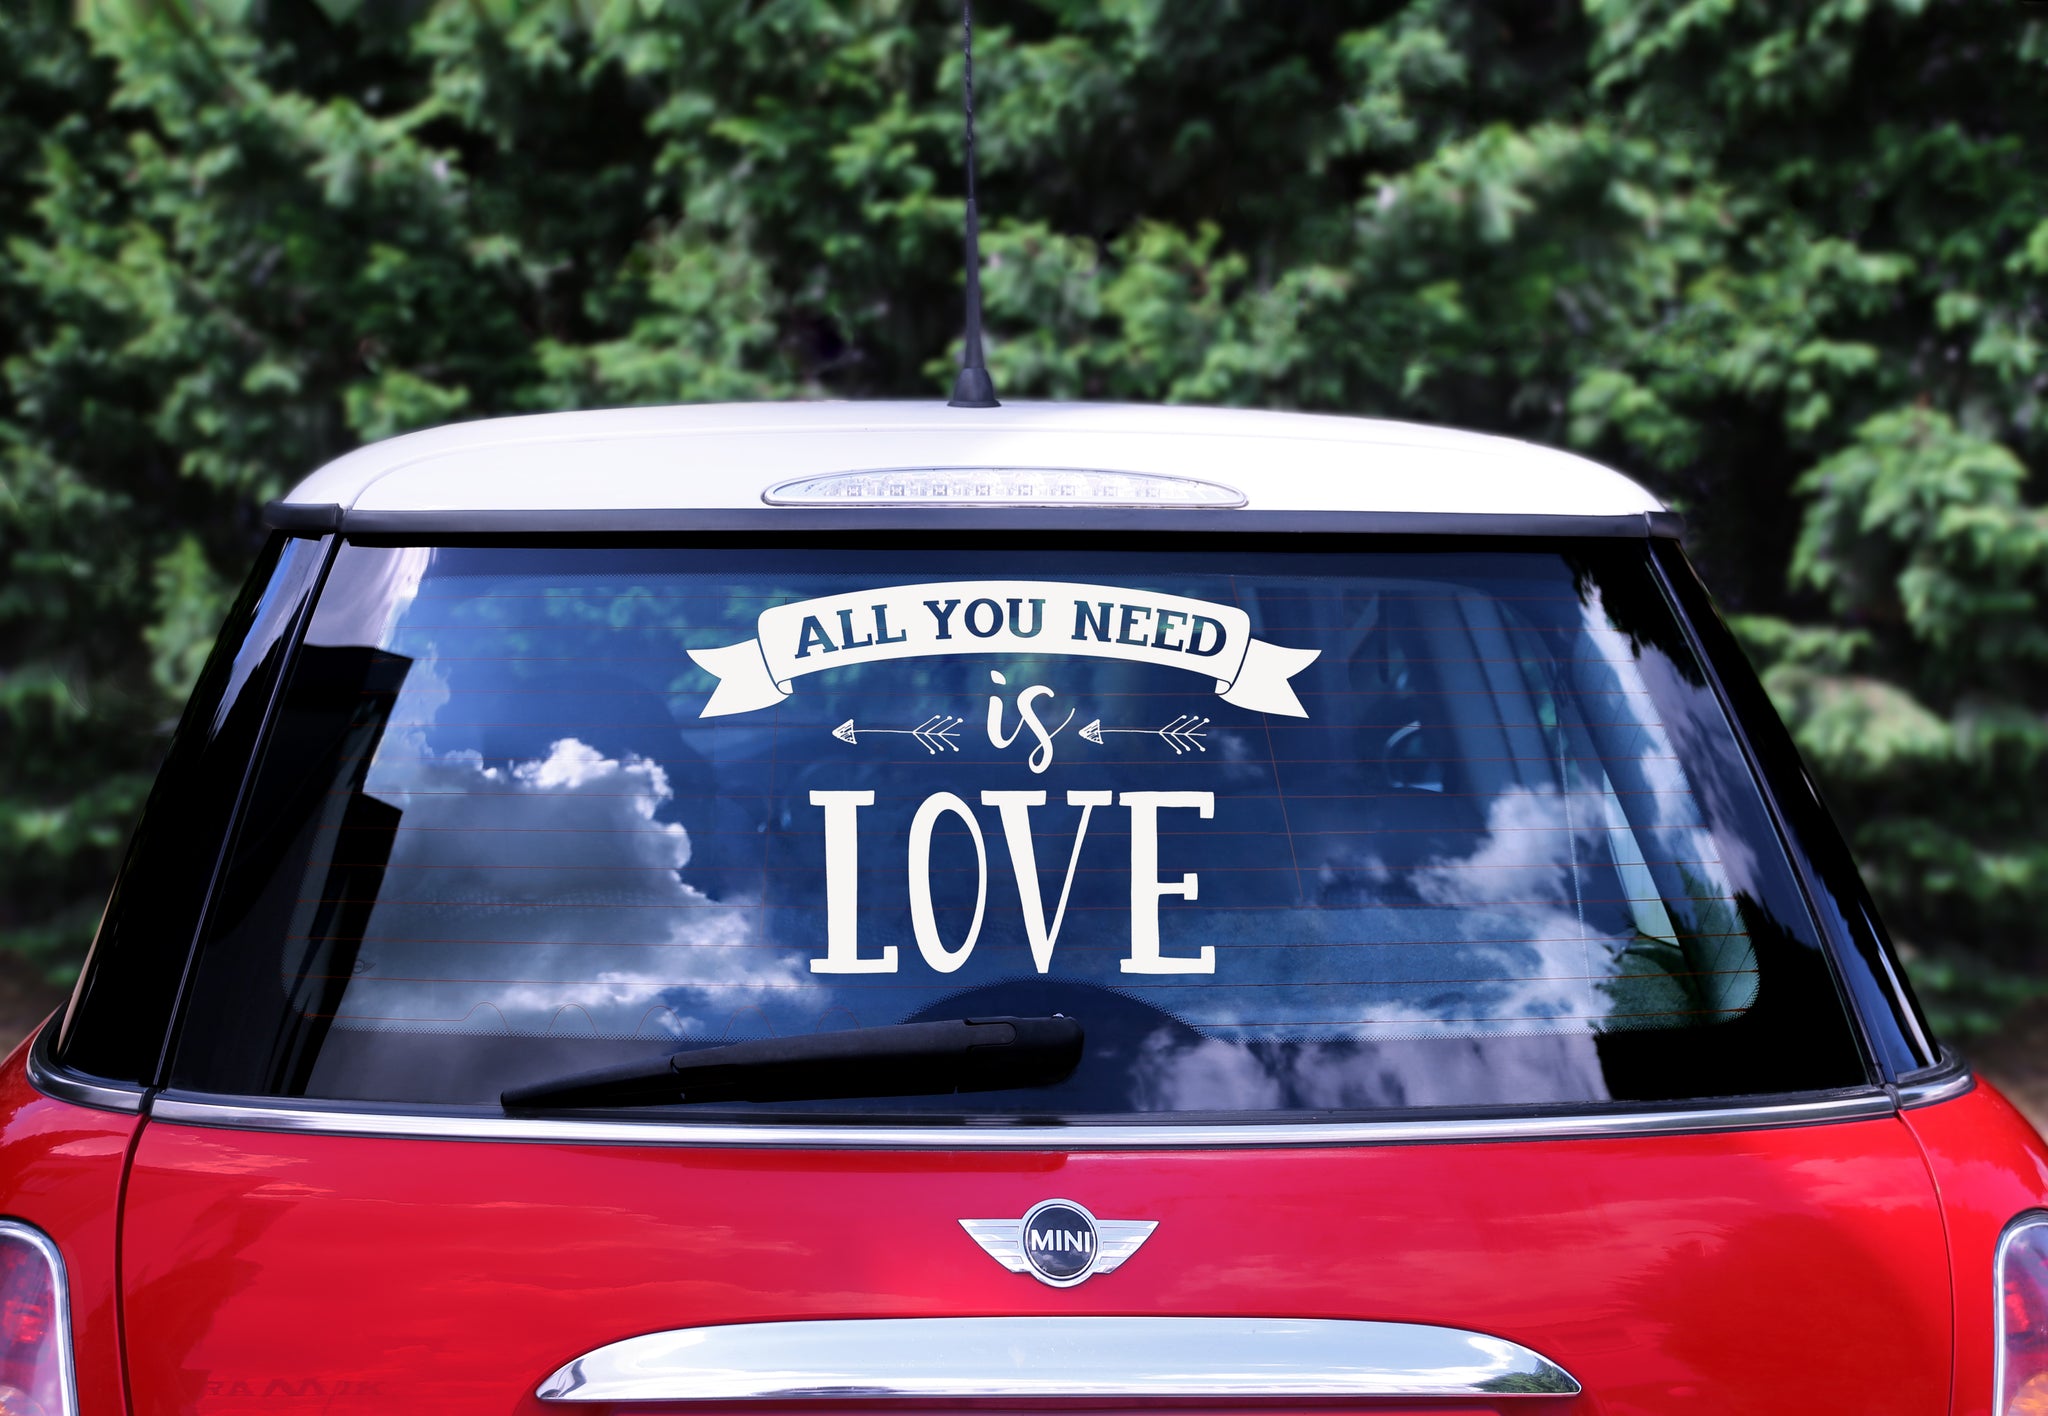 Adhesive car "All you need is love"